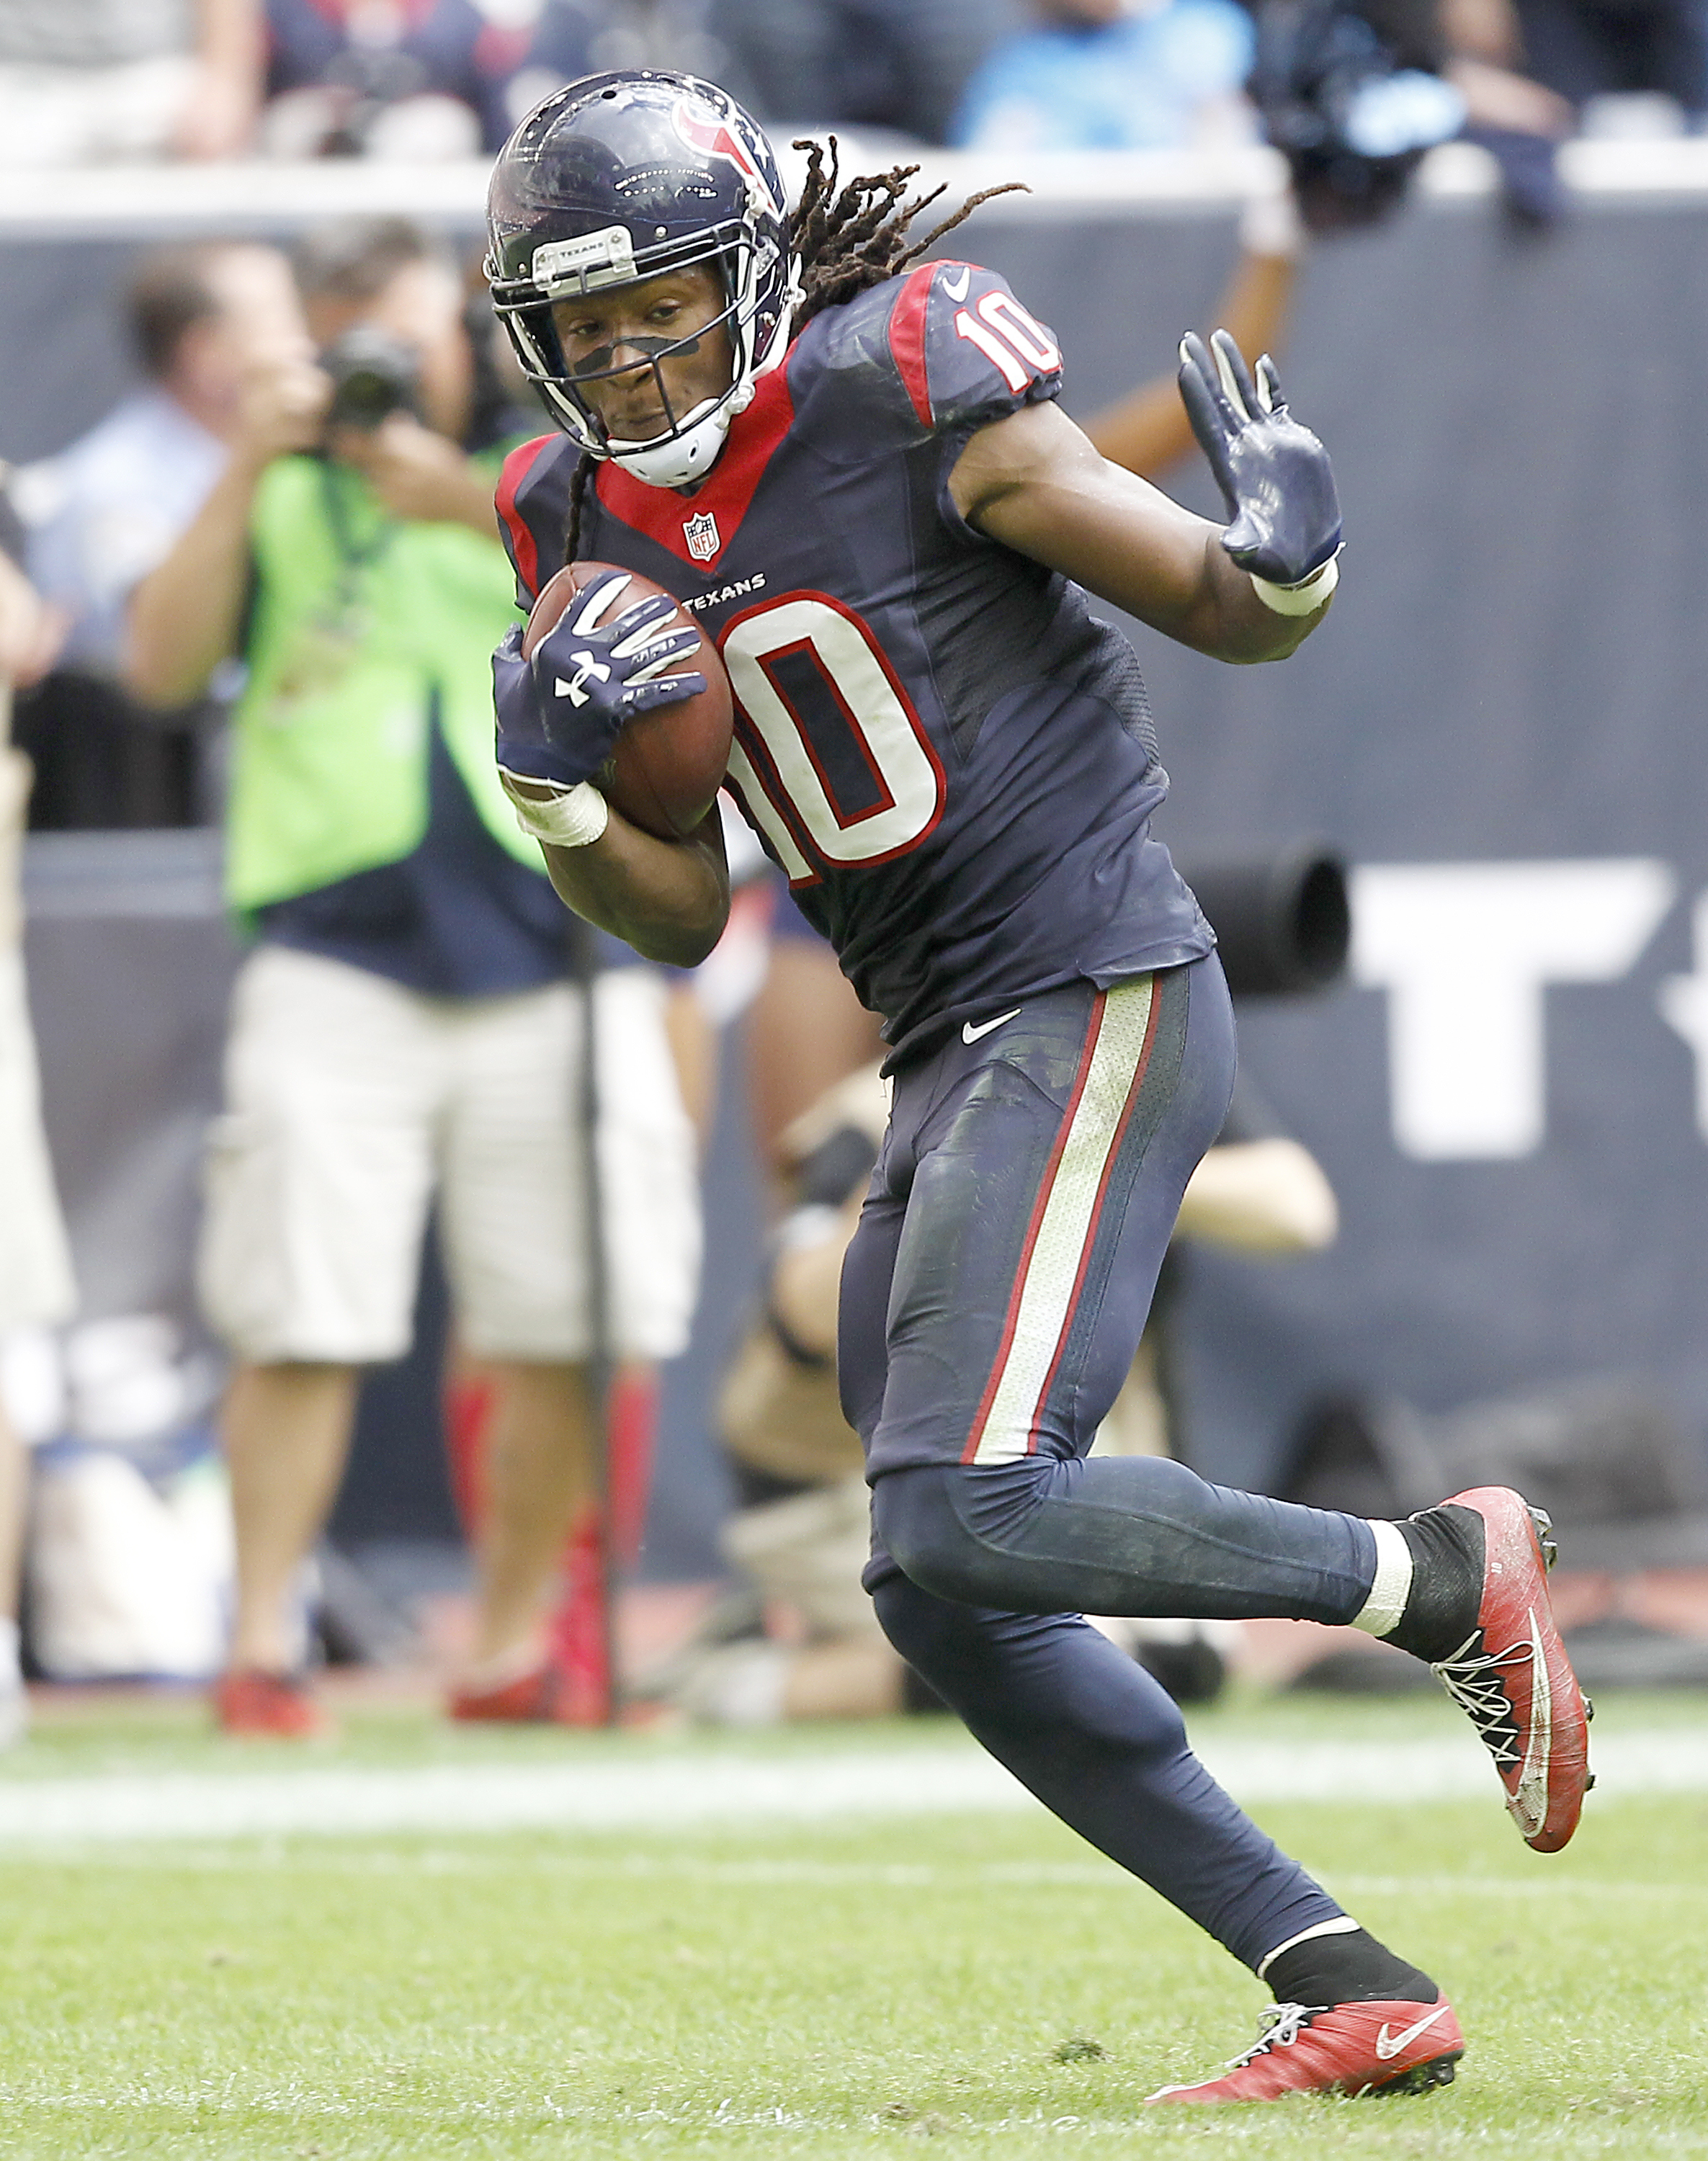 Without Andre Johnson, DeAndre Hopkins needs to step up in the Texans offense (Getty).